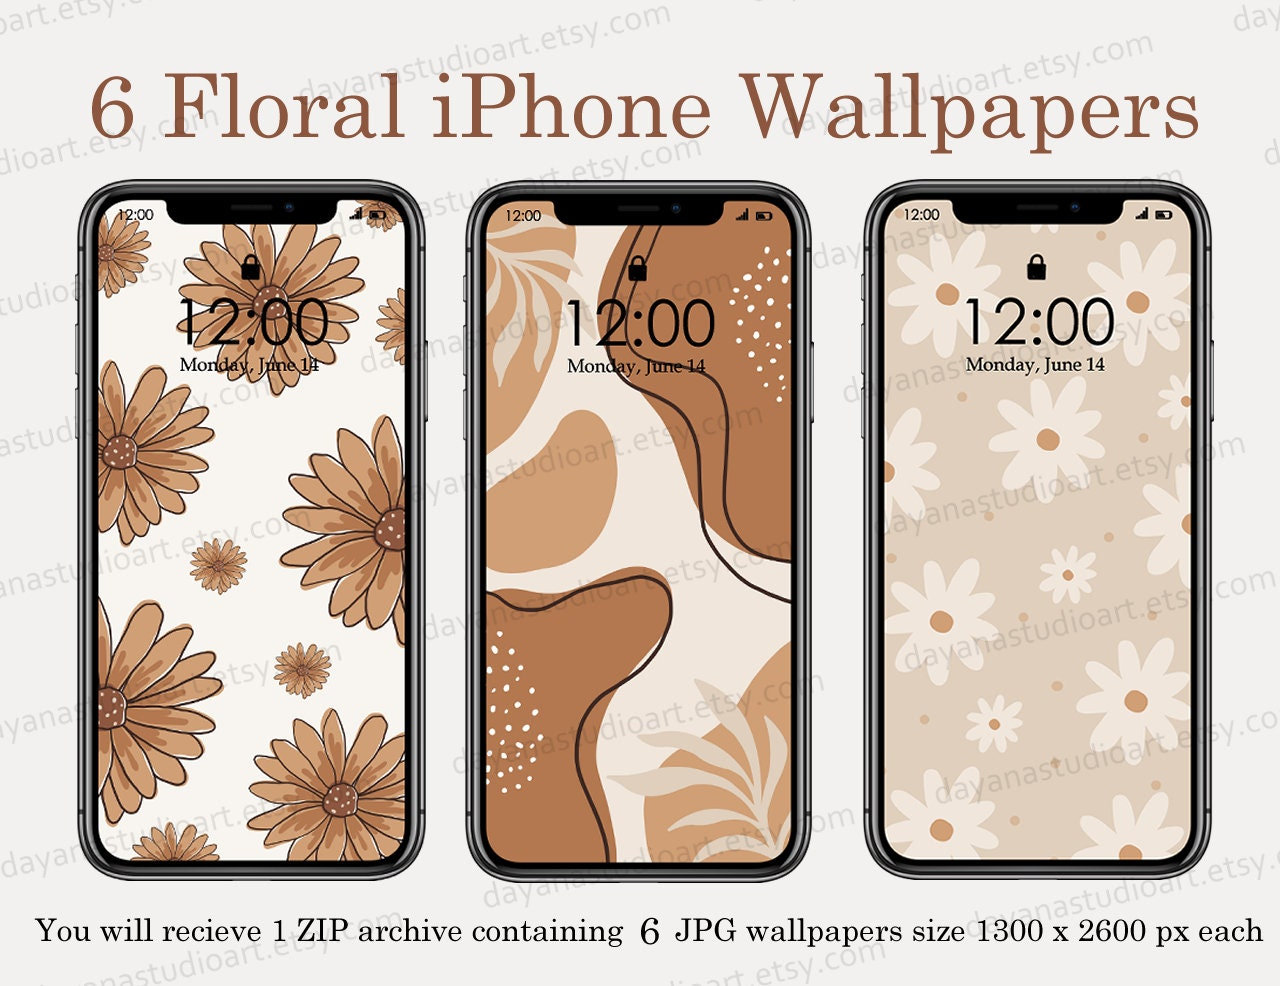 BROWN WALLPAPER by Erica Wakerly